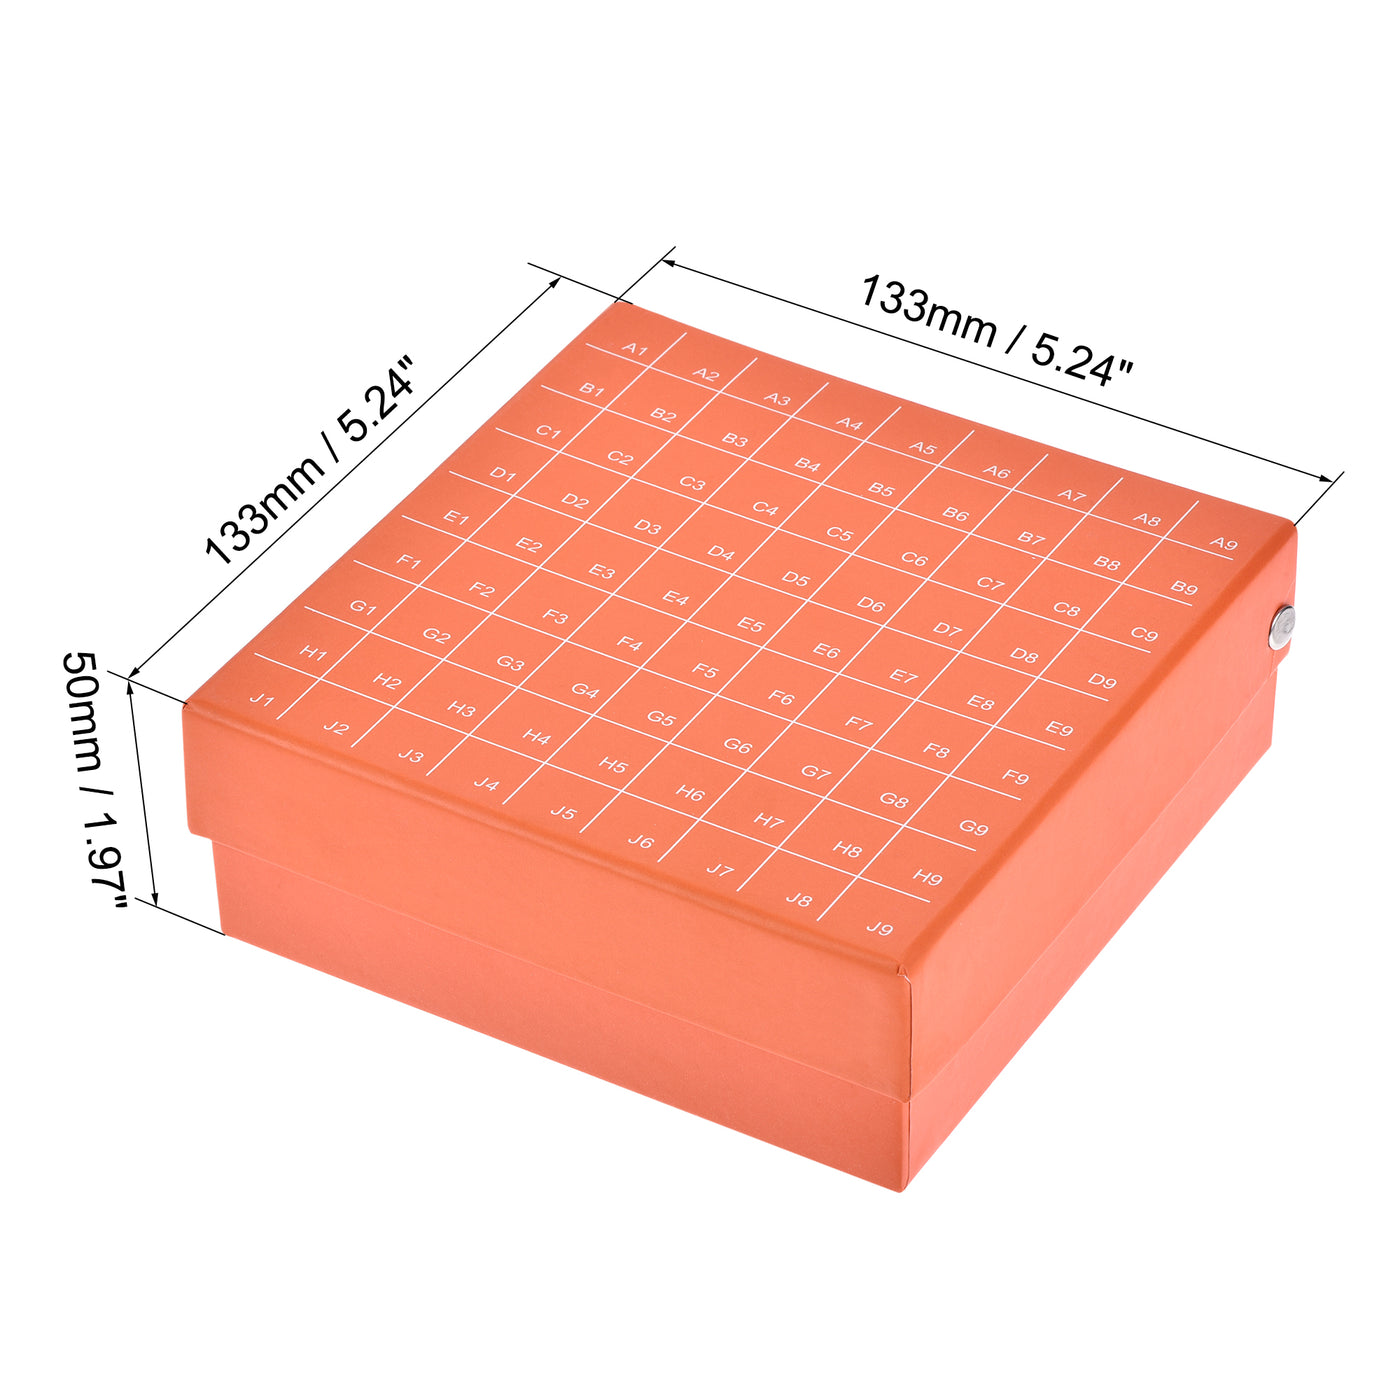 uxcell Uxcell Centrifuge Tube Holder 81-Well Waterproof Cardboard Orange for 1.8/2ml Tubes